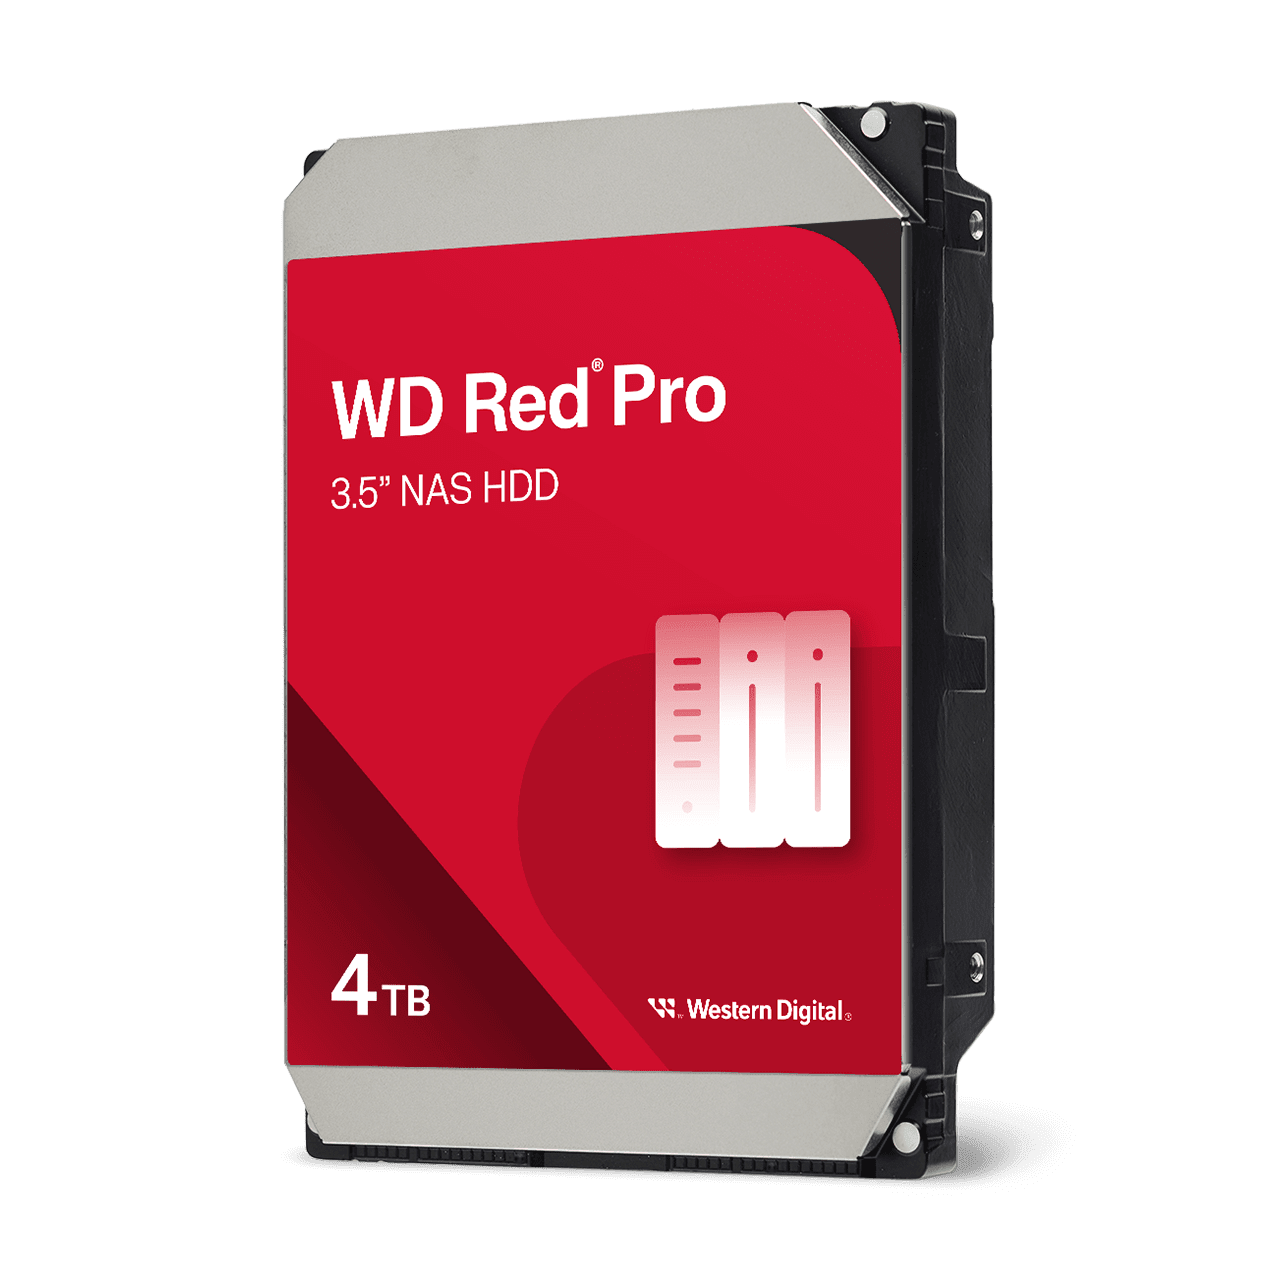 WD Red™ Pro 4TB NAS Hard Drive - Image2